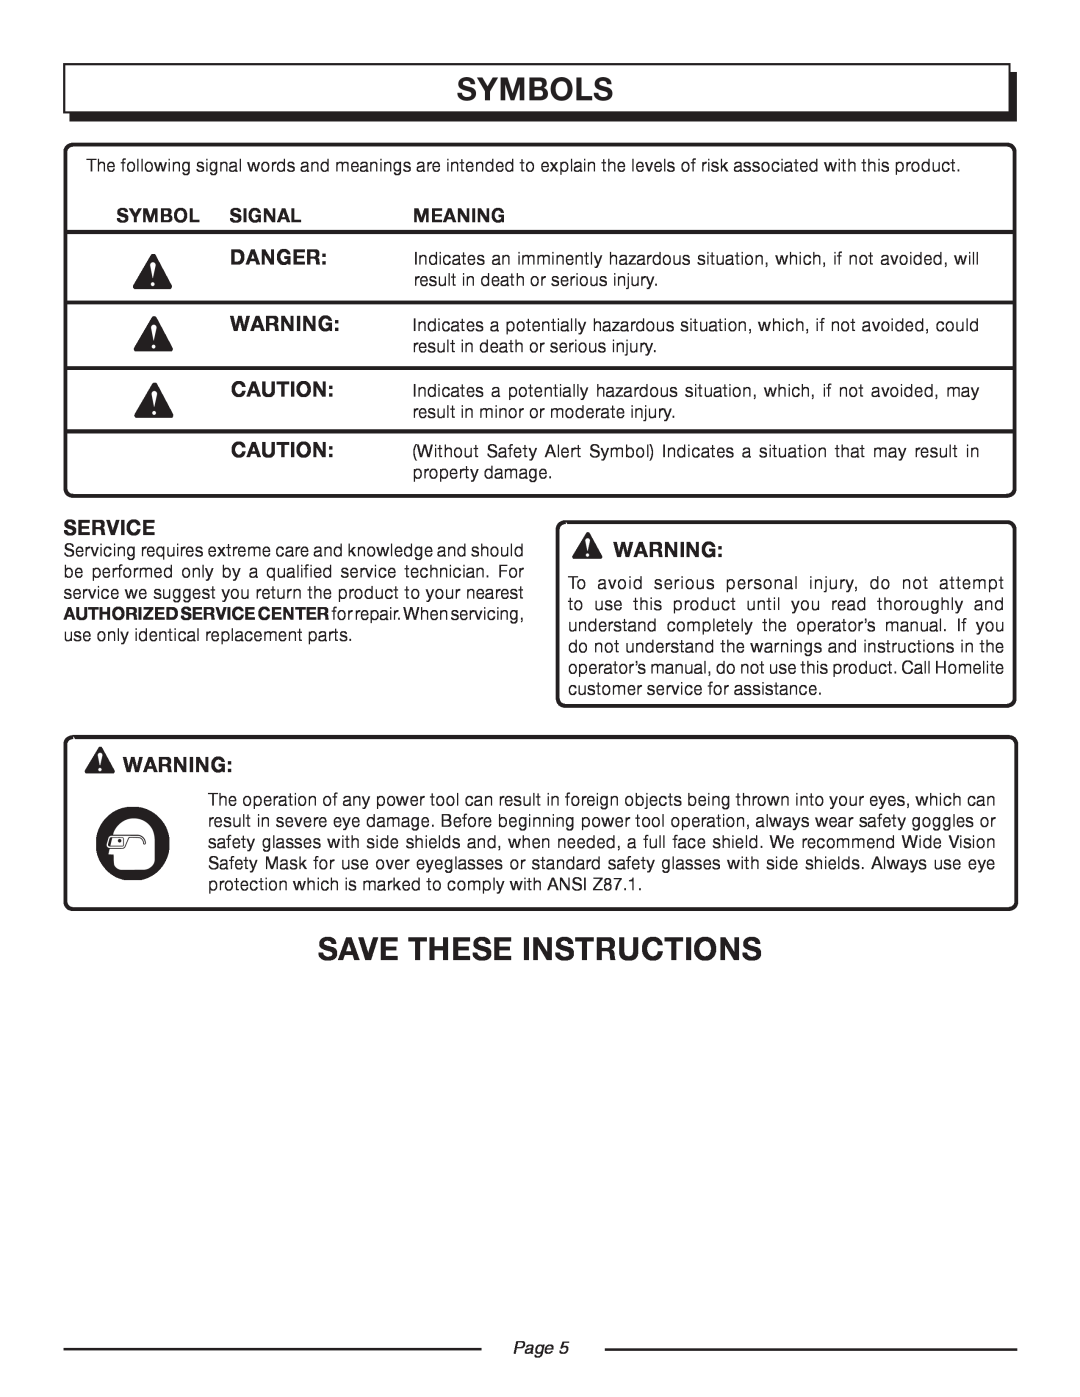 Homelite UT08520 manual Save These Instructions, Service, symbols, Symbol Signal, Meaning, Page  